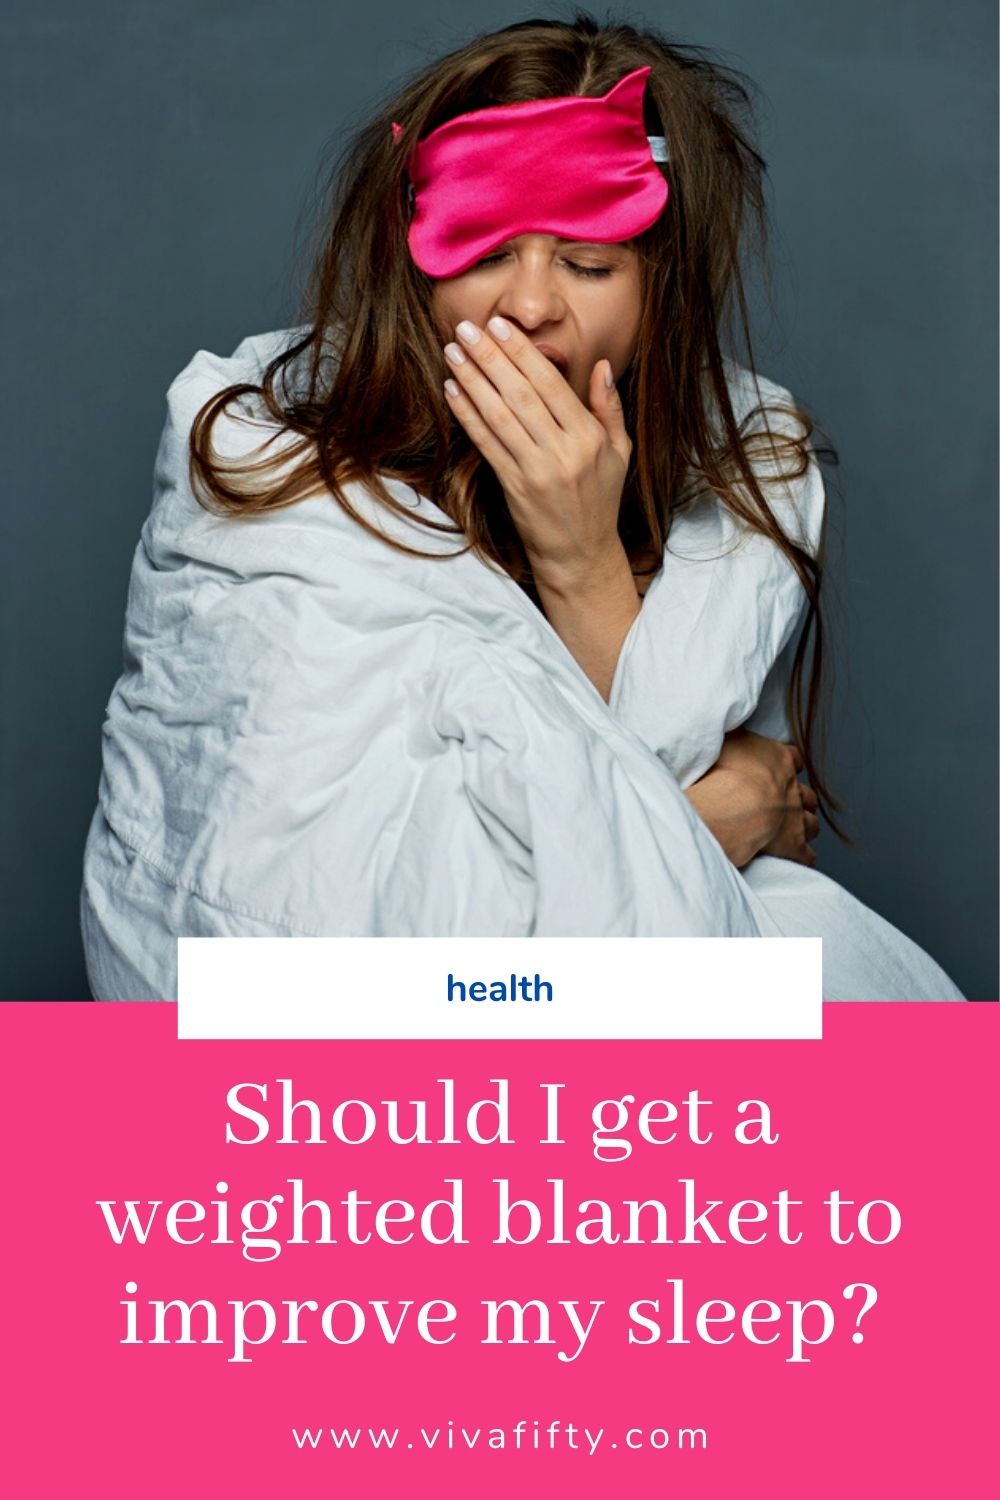 Weighted blankets seem to be the rage because they claim to provide relief for a variety of physical and emotional issues. 